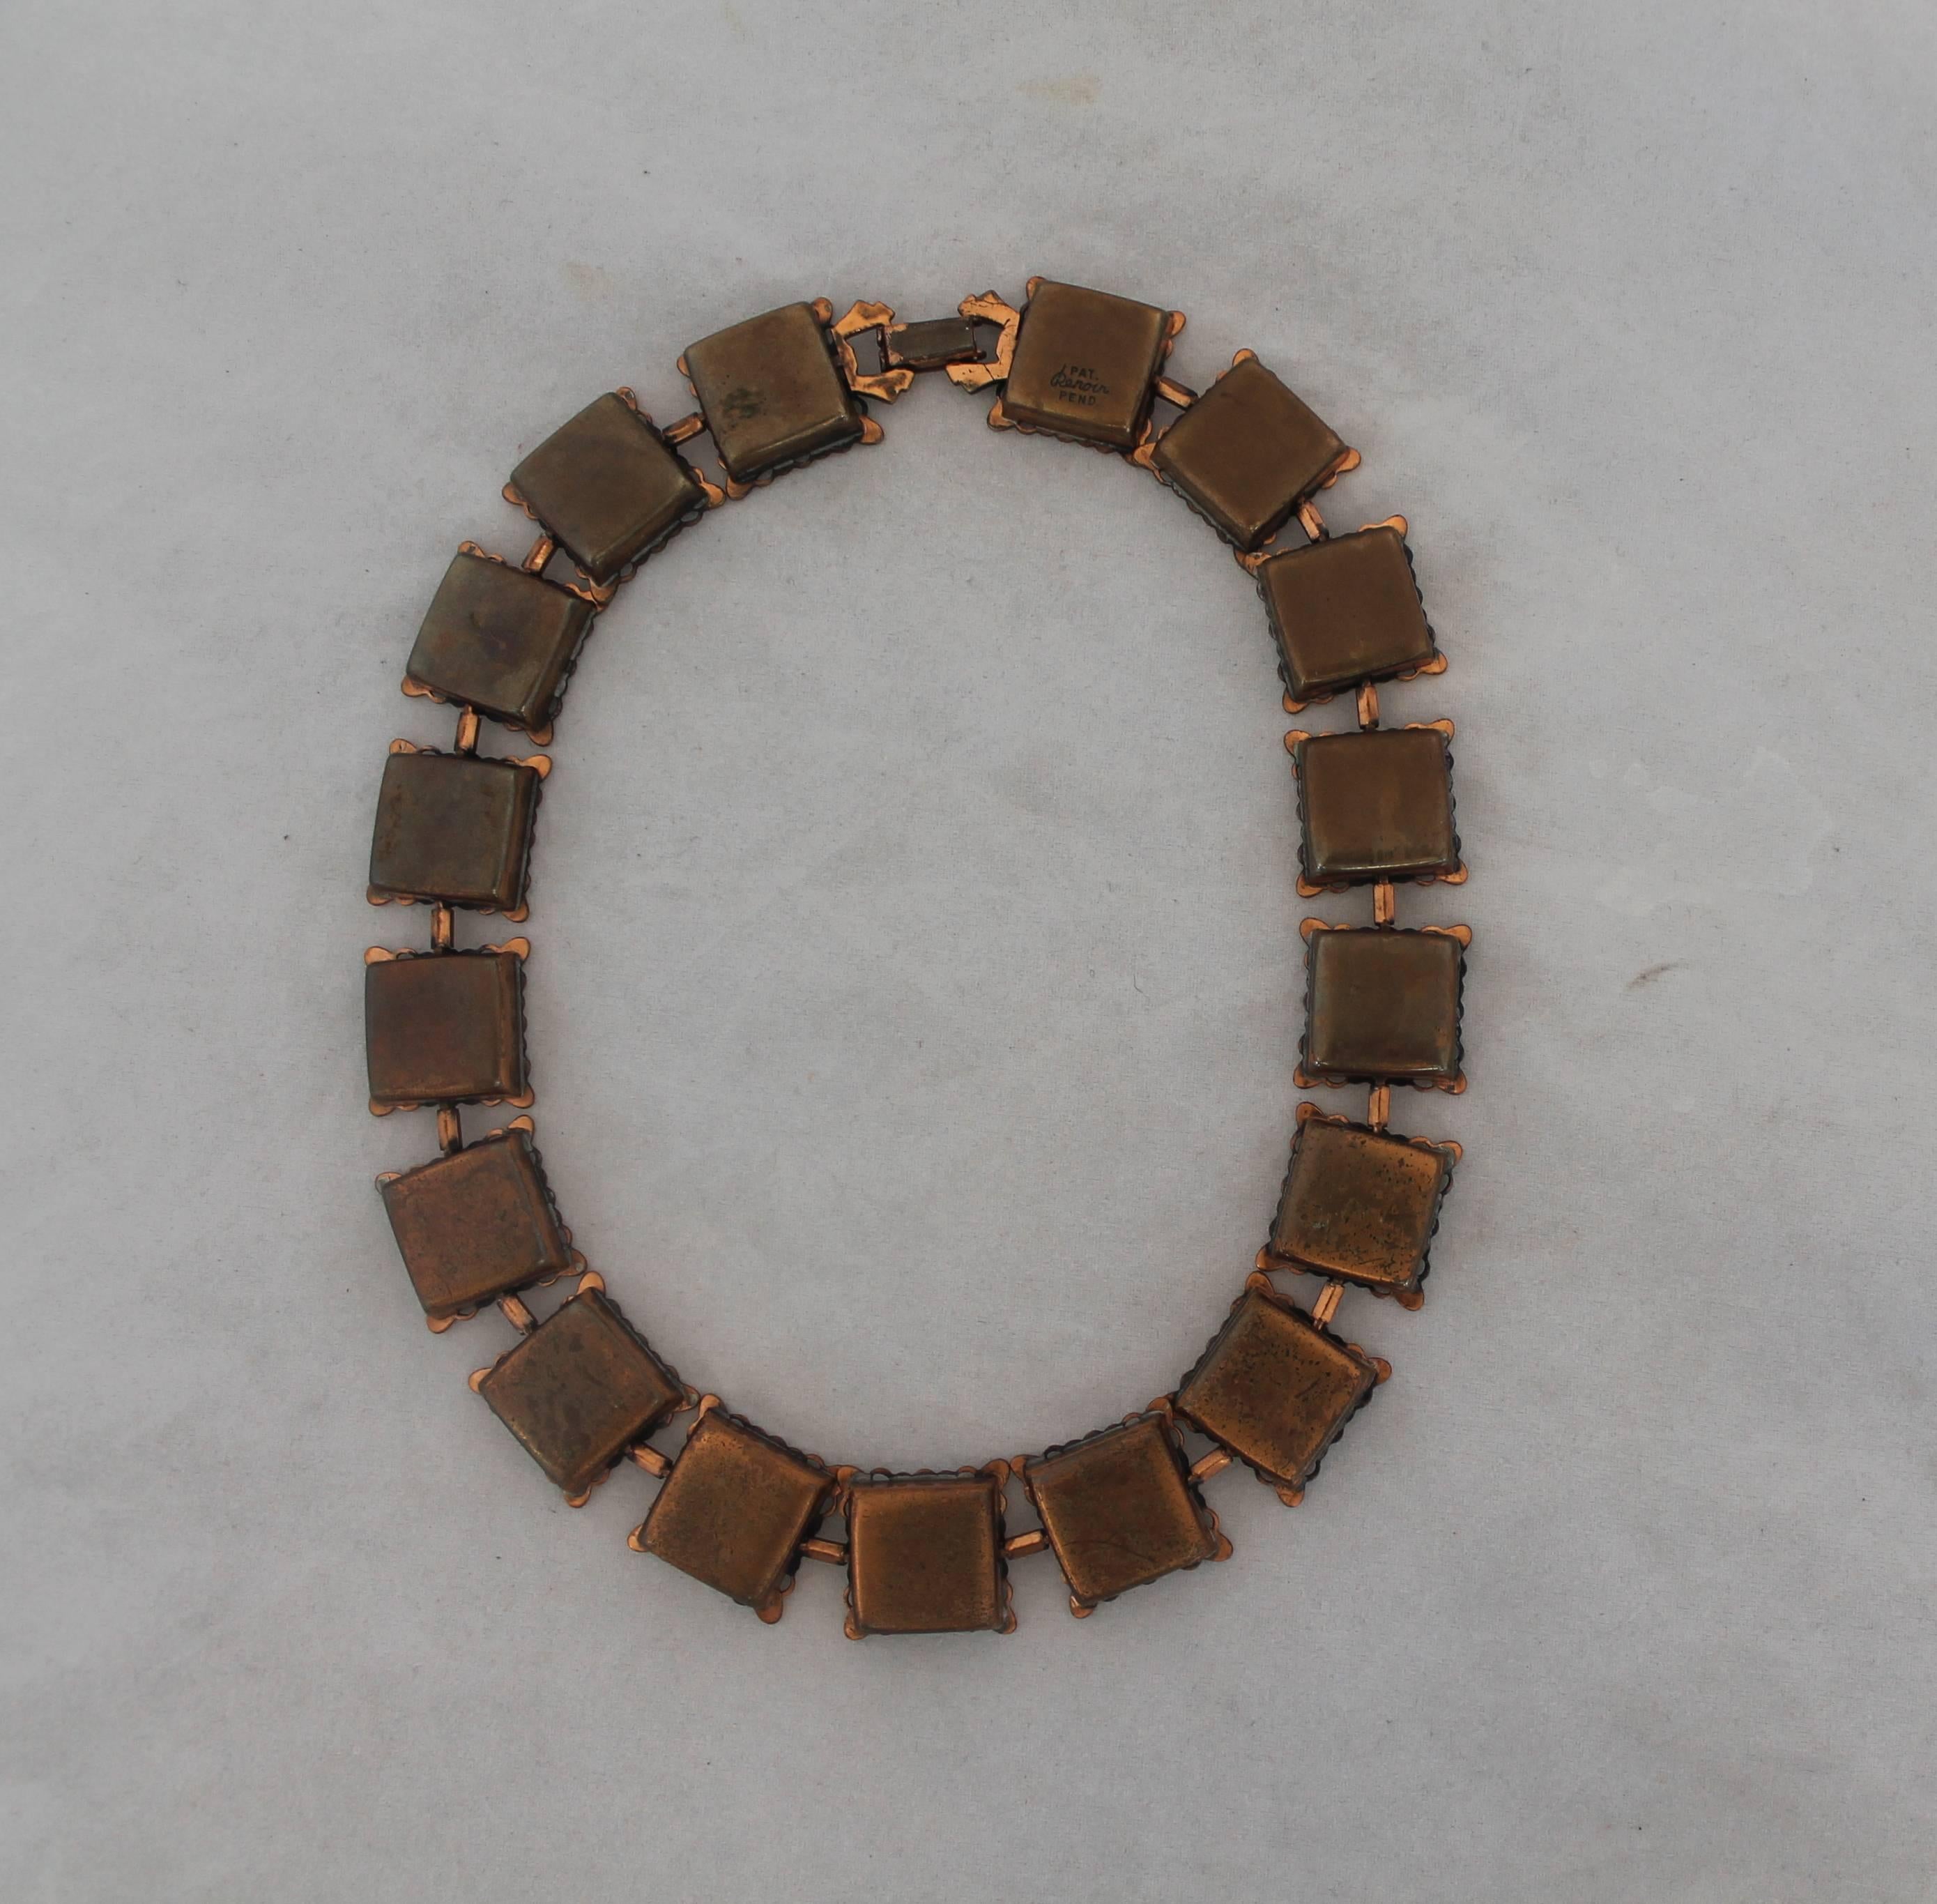 Matisse-Renoir Vintage Copper Square Necklace - Circa 1950's.  This artsy vintage necklace is in good vintage condition with only some wear consistent with its age.  It features a lovely copper metal, a unique square design, dark brushed sections